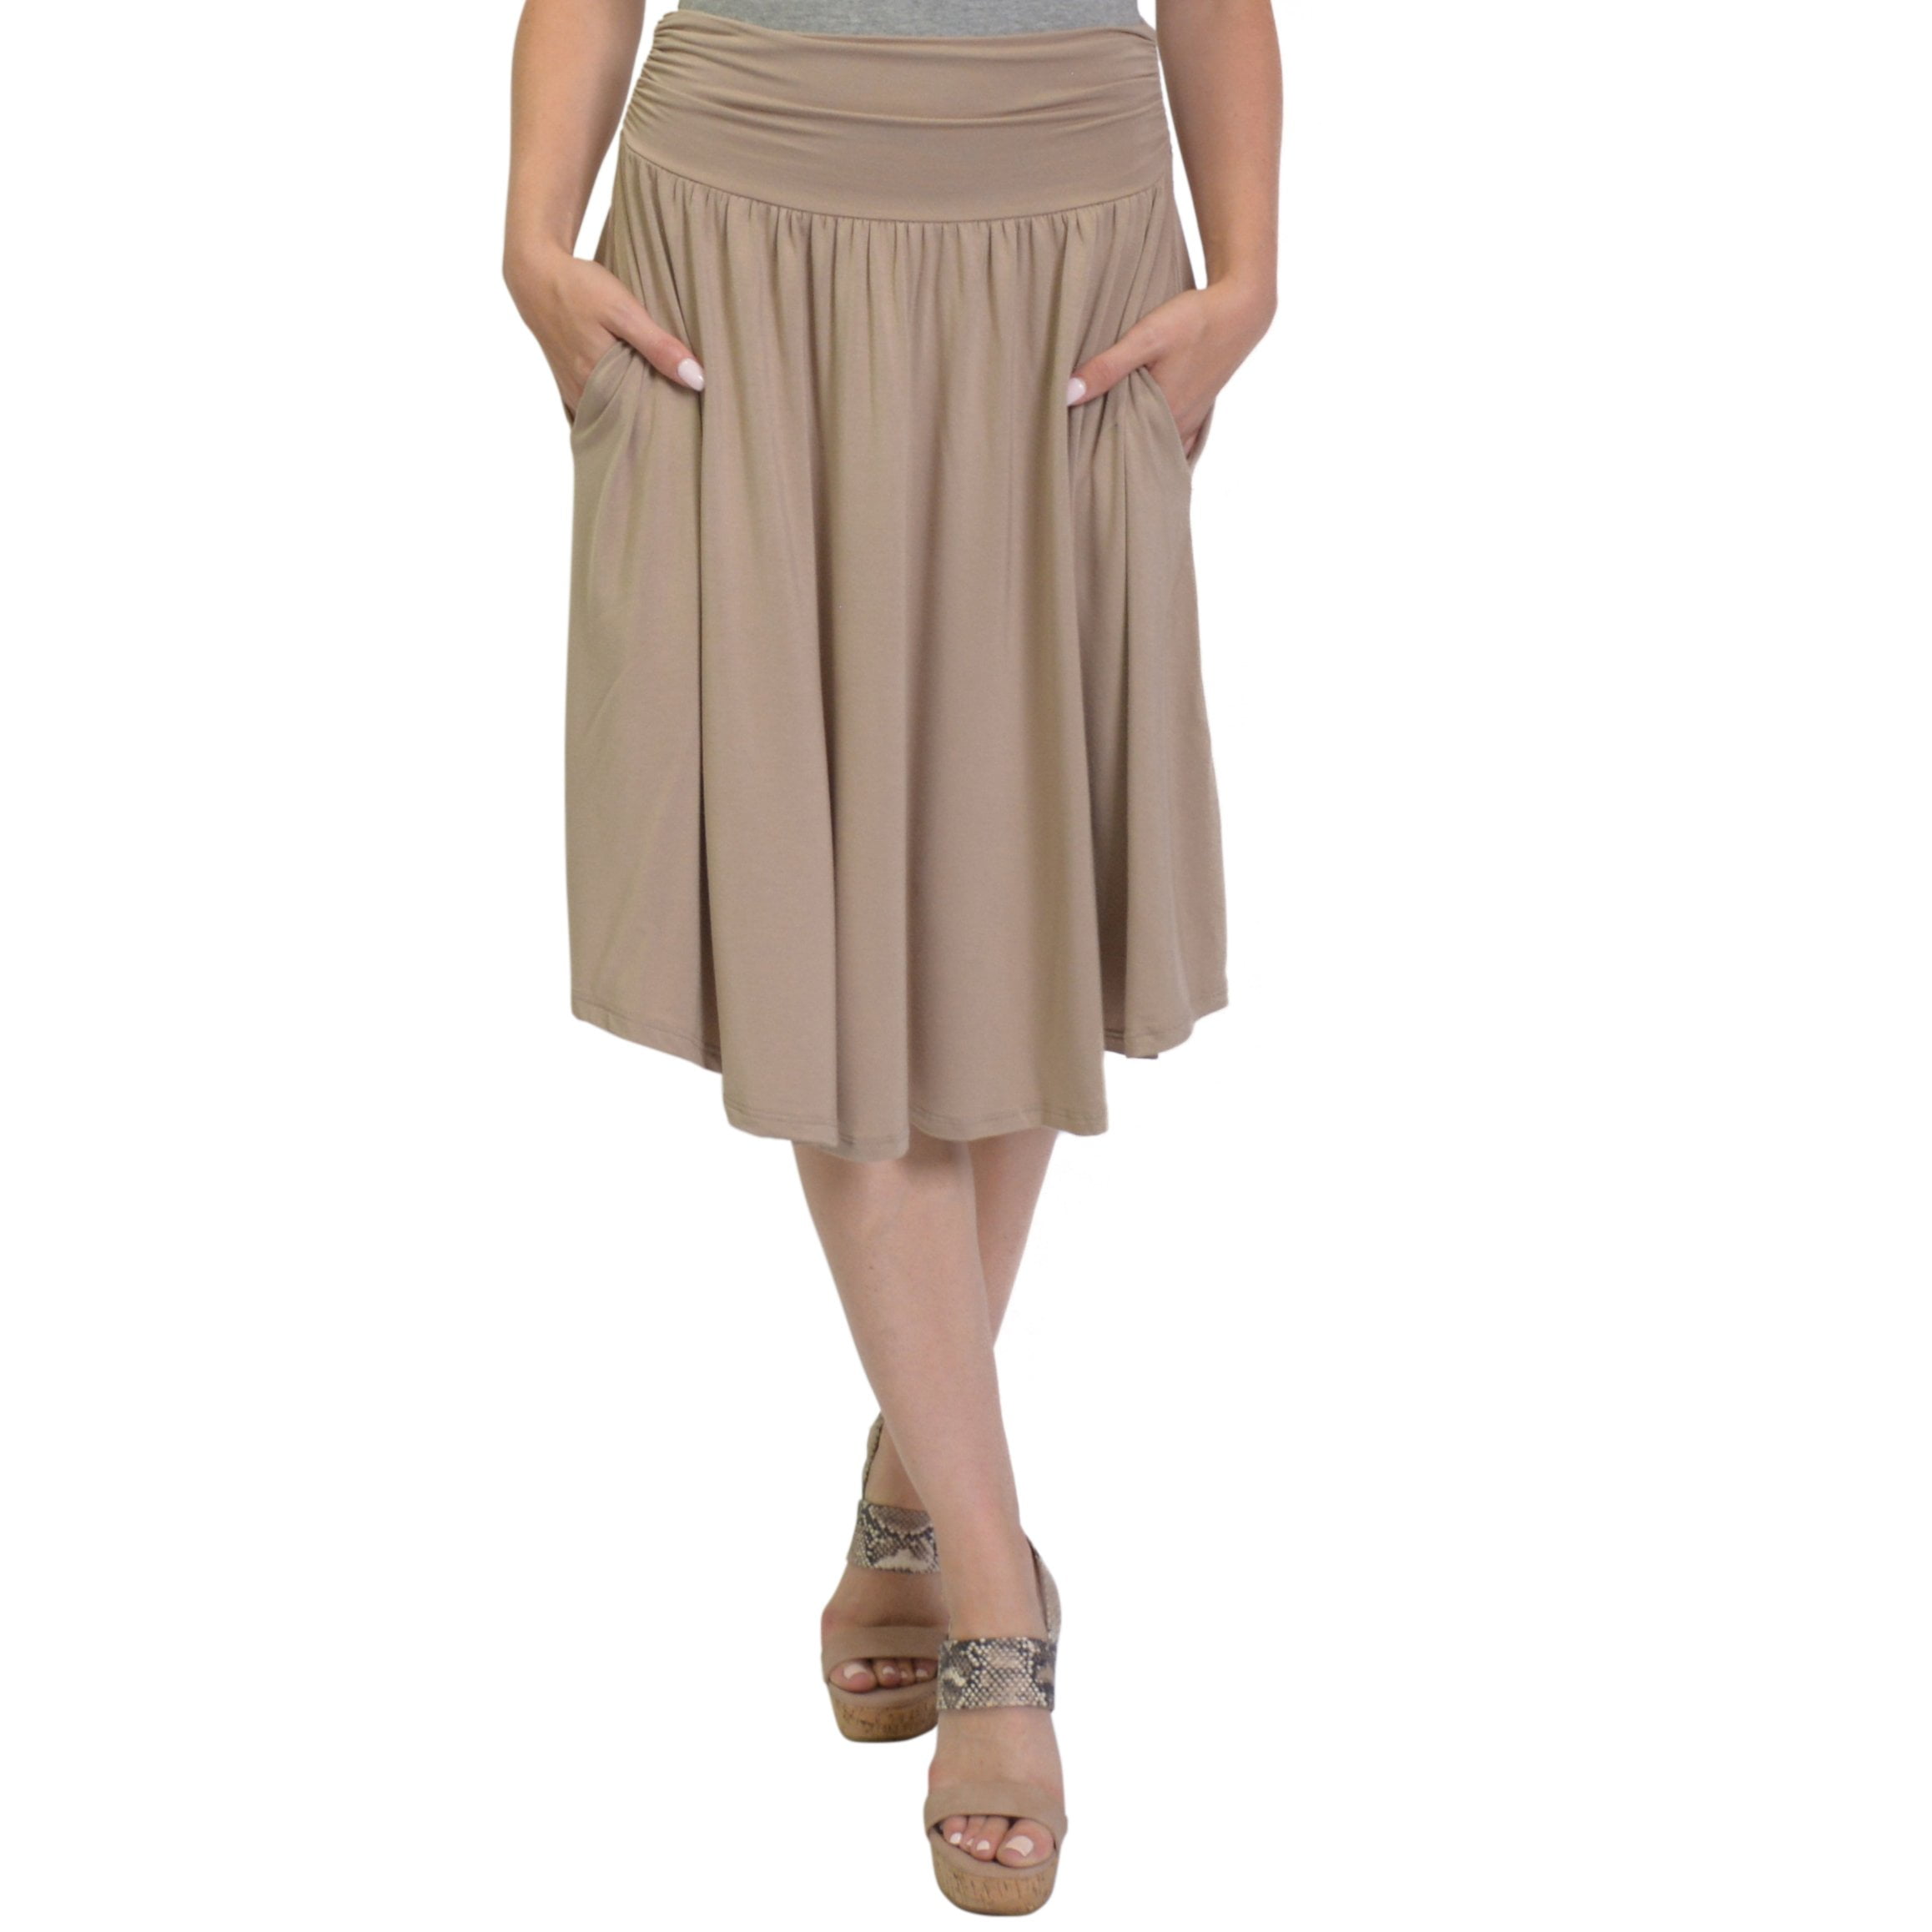 Stretch Is Comfort - Women's Regular and Plus Size Pocket Skirt ...